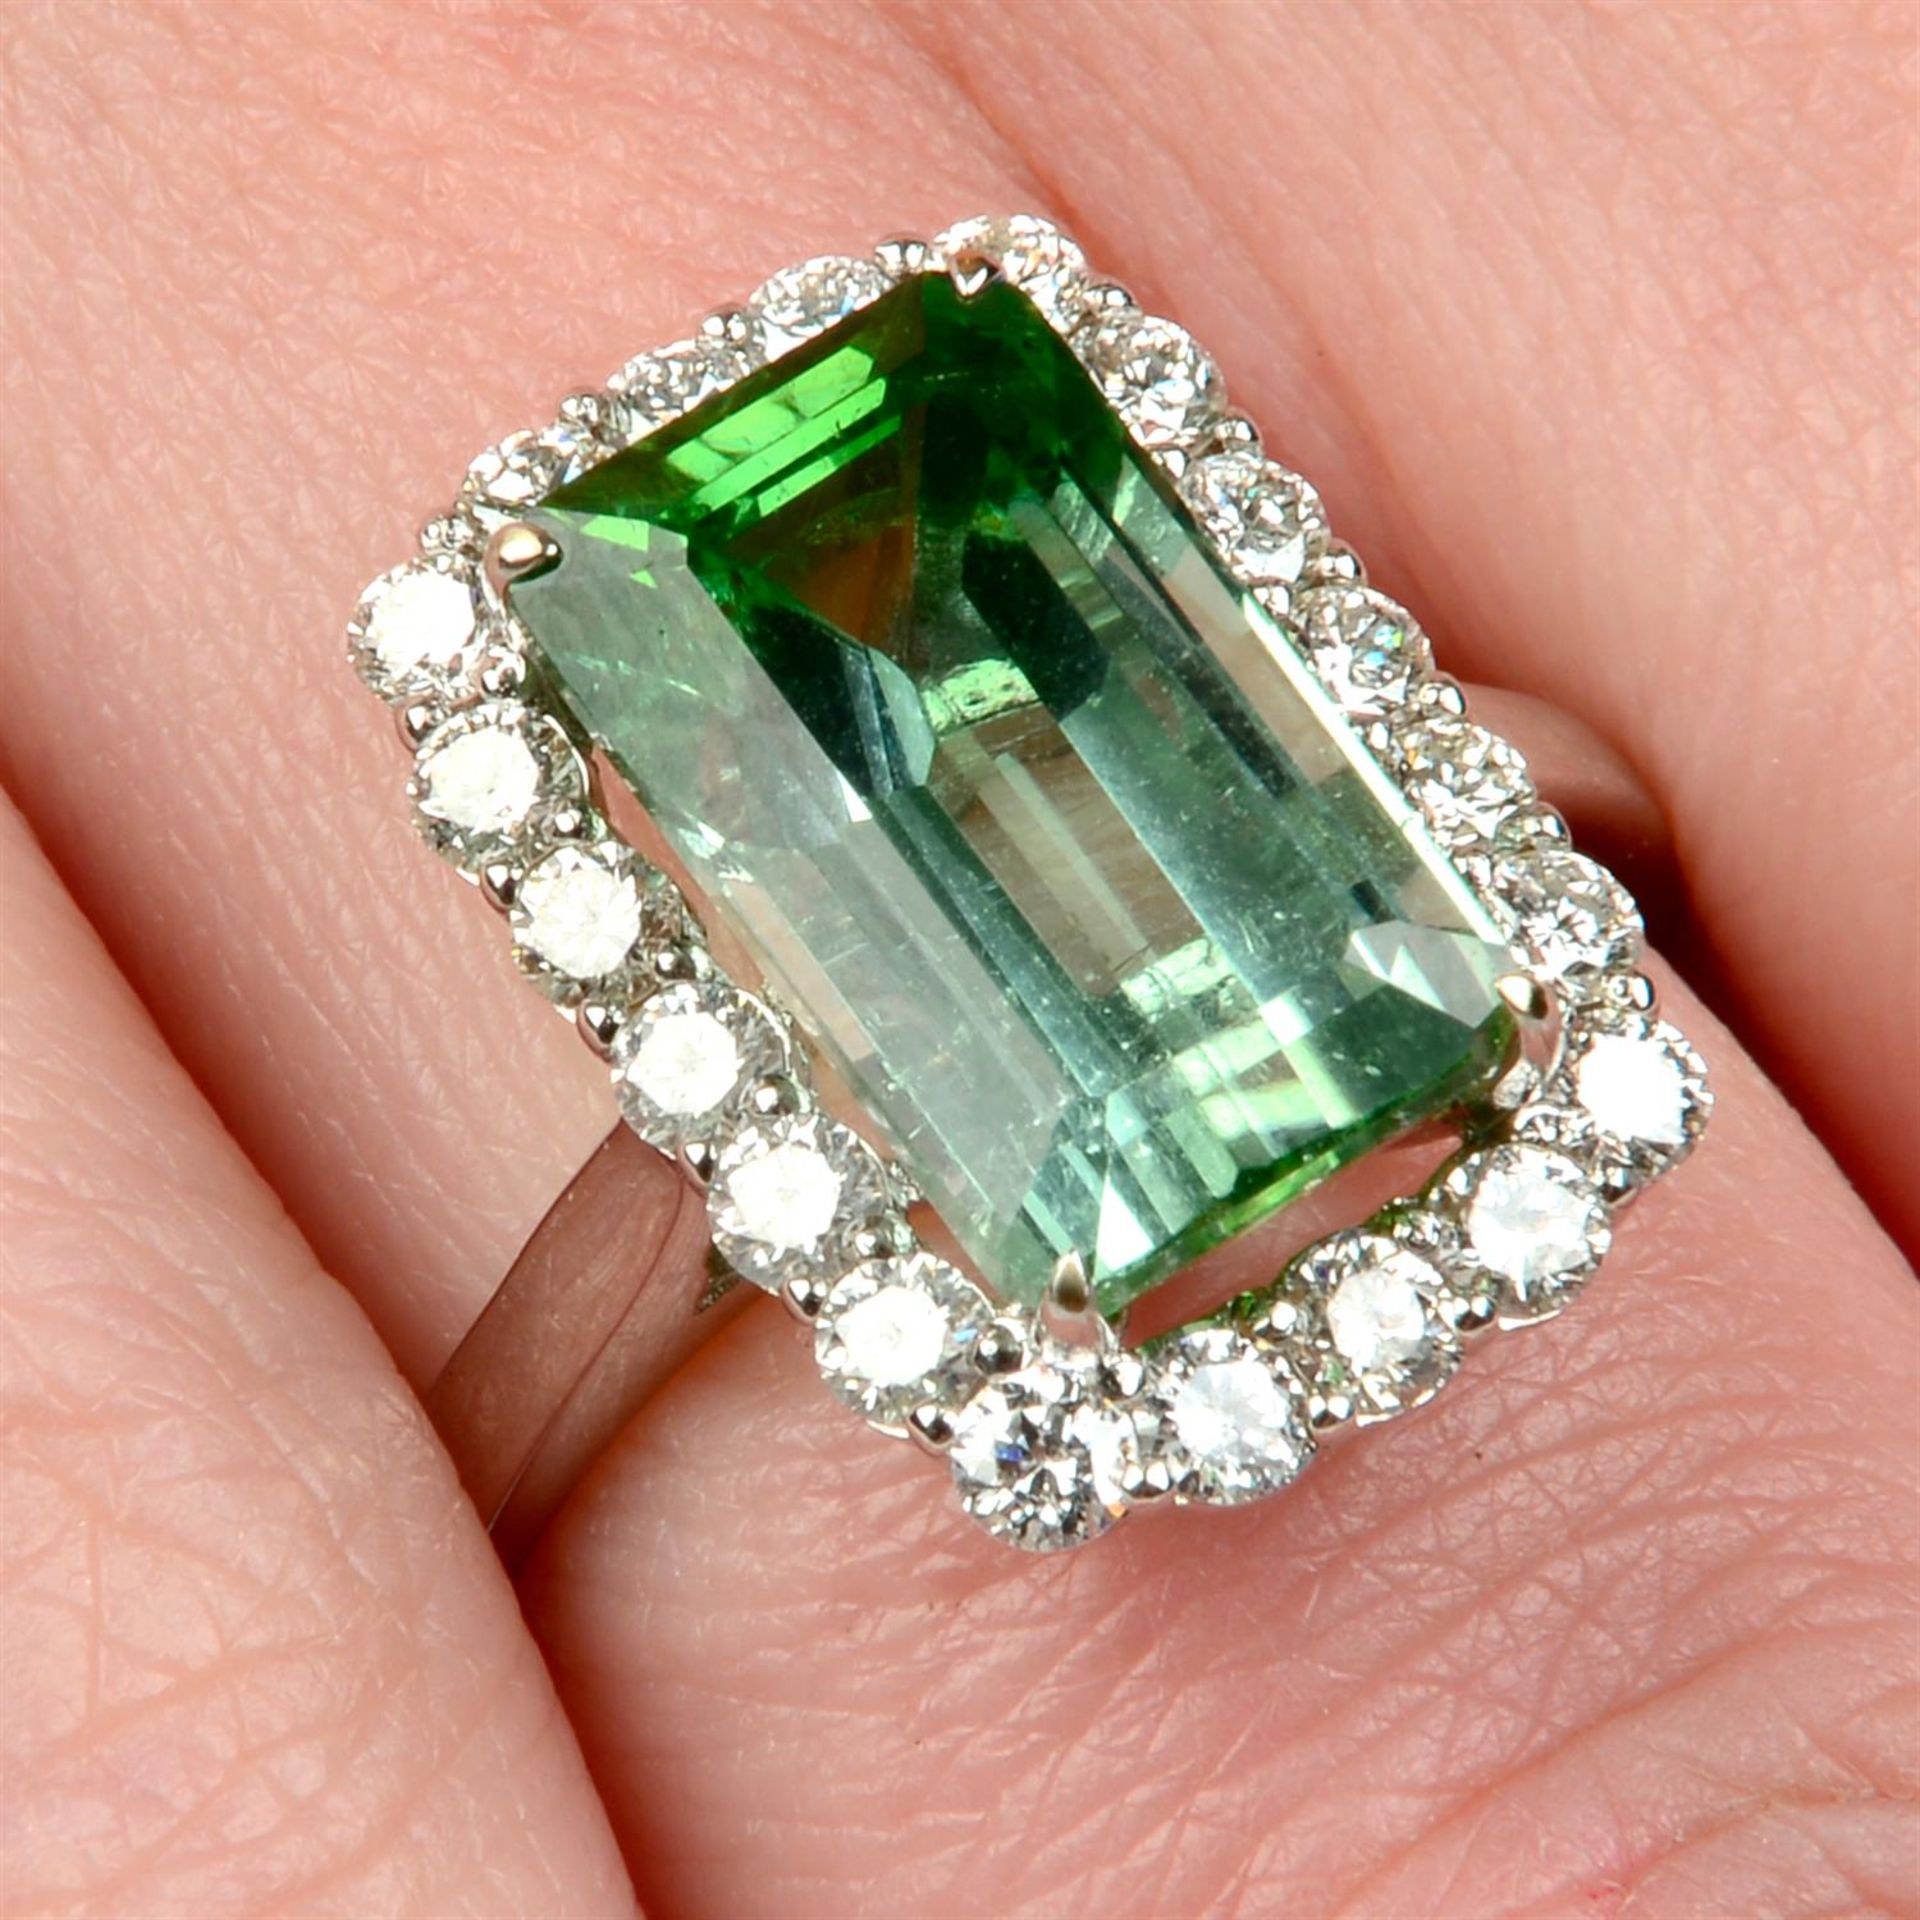 A green tourmaline and brilliant-cut diamond cluster ring.